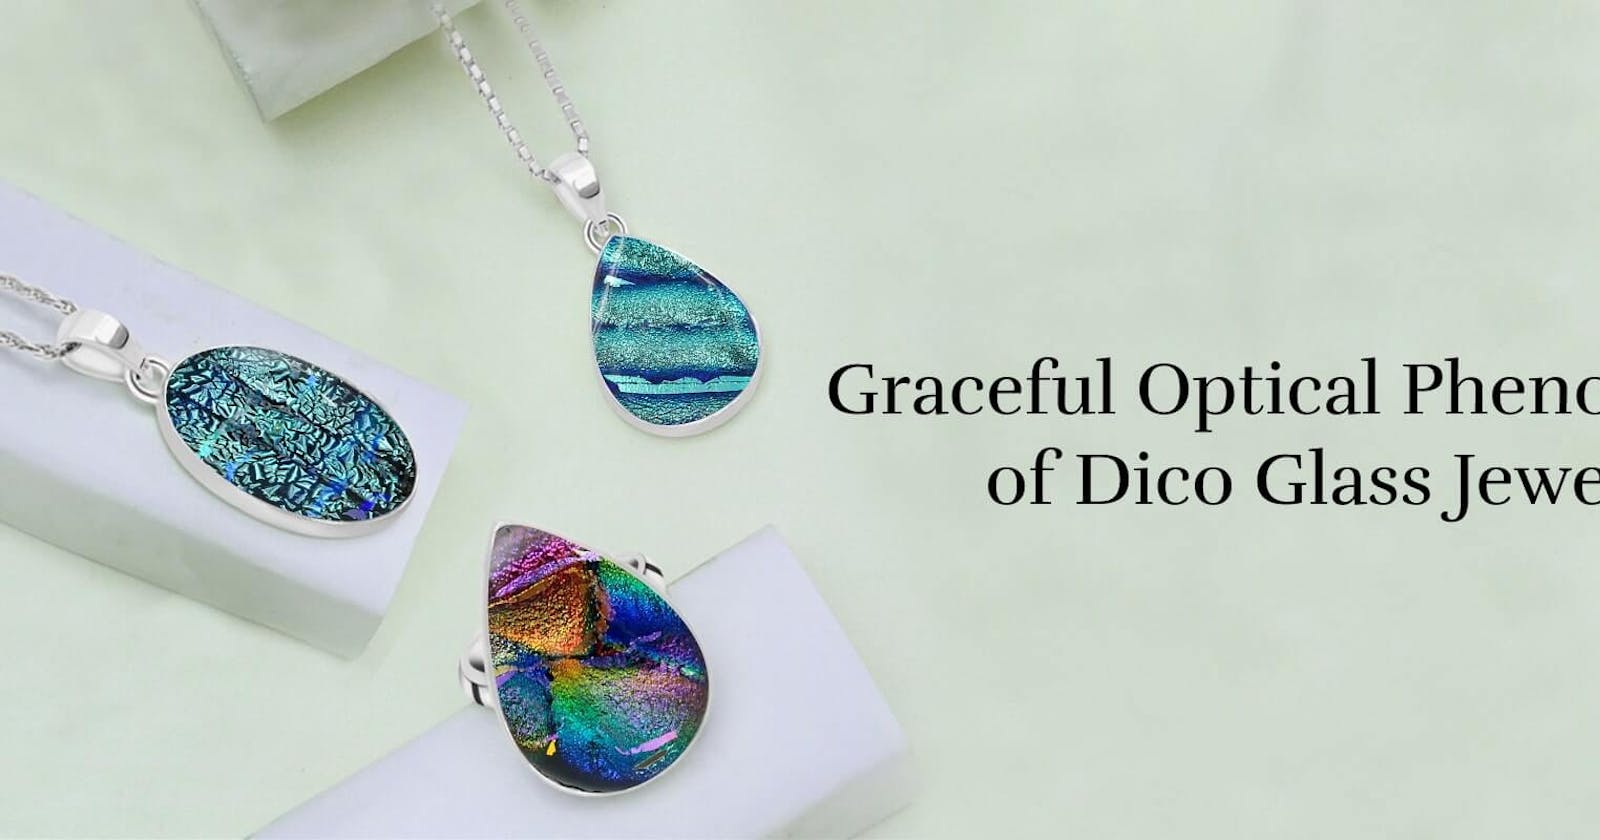 Iridescent Illusions: Dico Glass Jewelry for Captivating Elegance